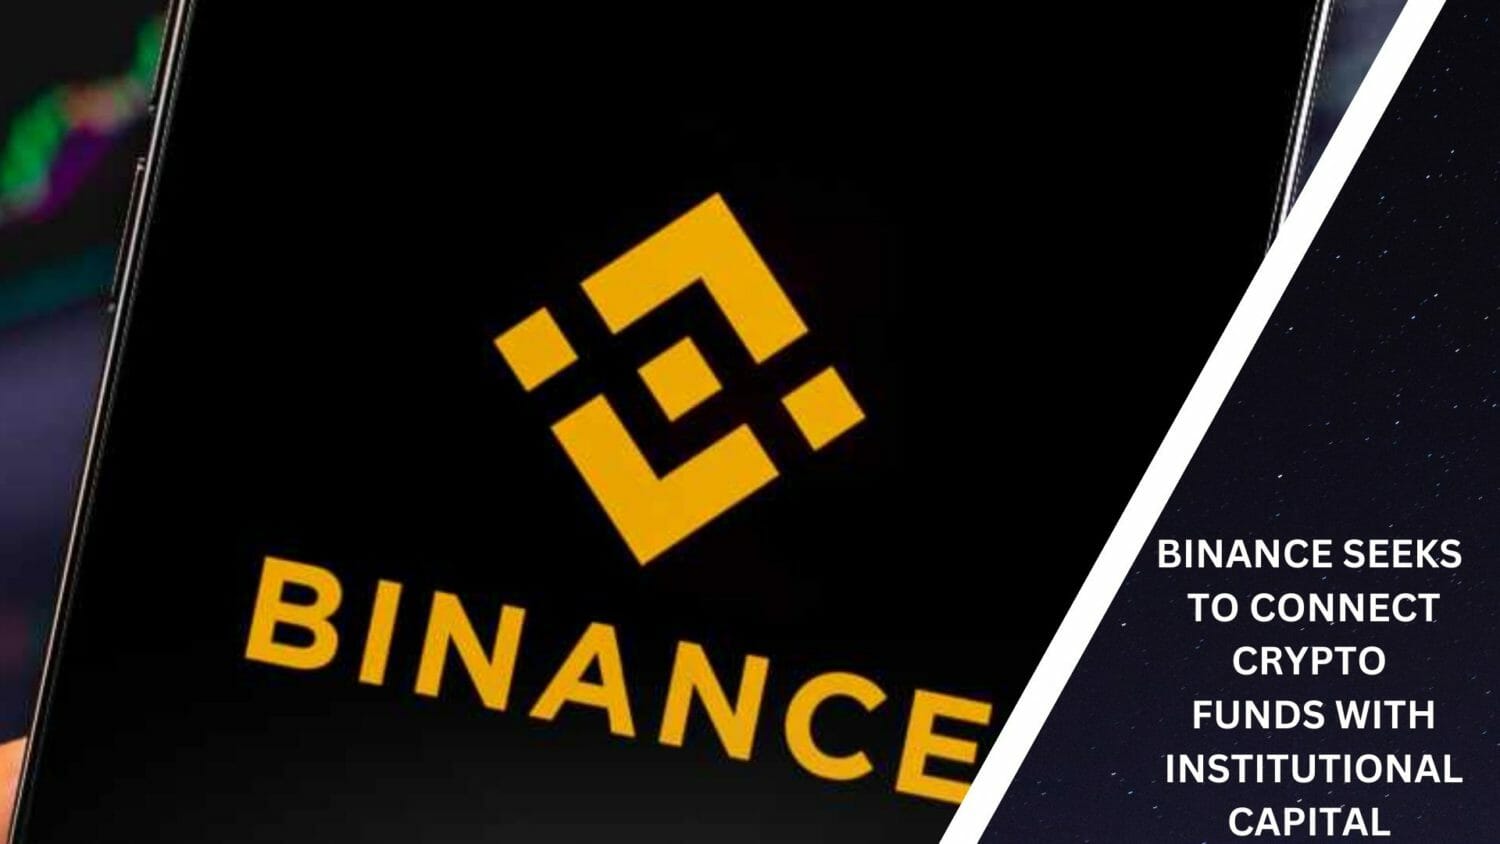 Binance Seeks To Connect Crypto Funds With Institutional Capital